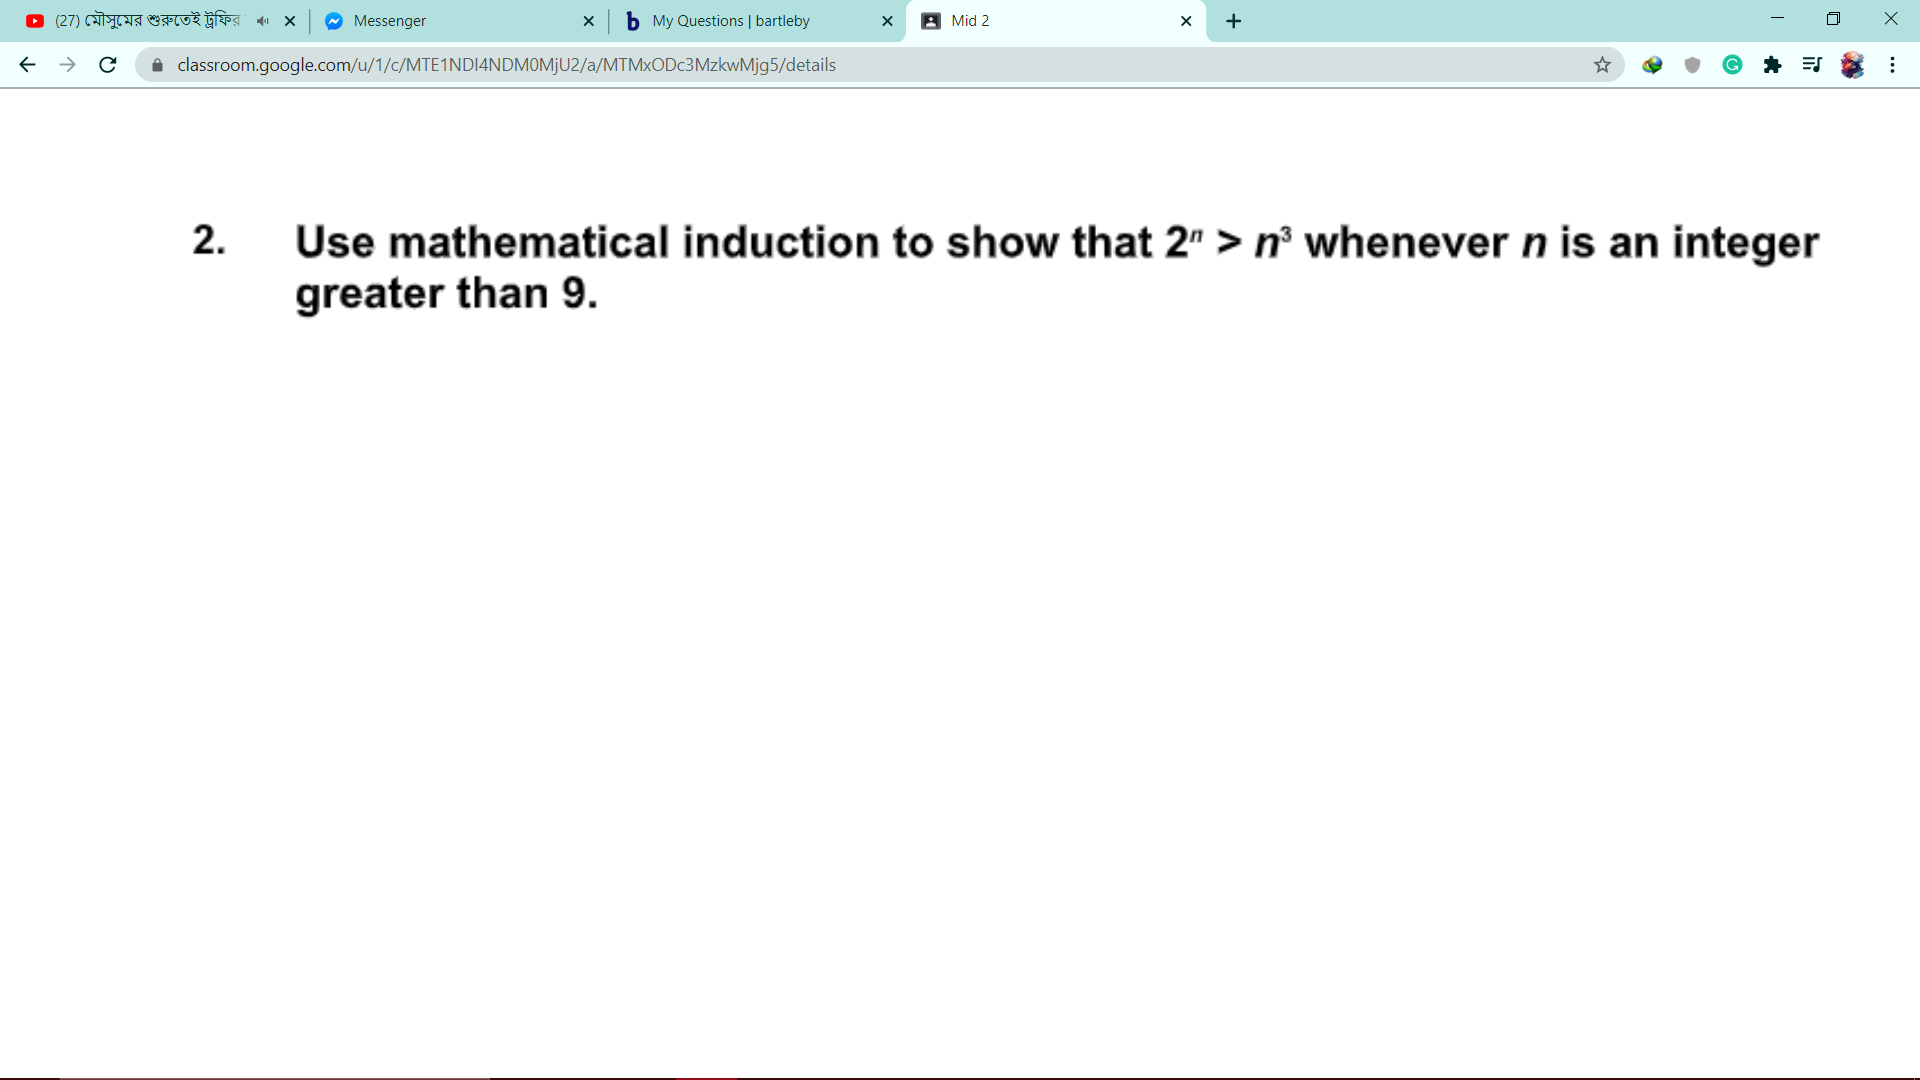 Use mathematical induction to show that 2" > n° whenever n is an integer
greater than 9.
2.
